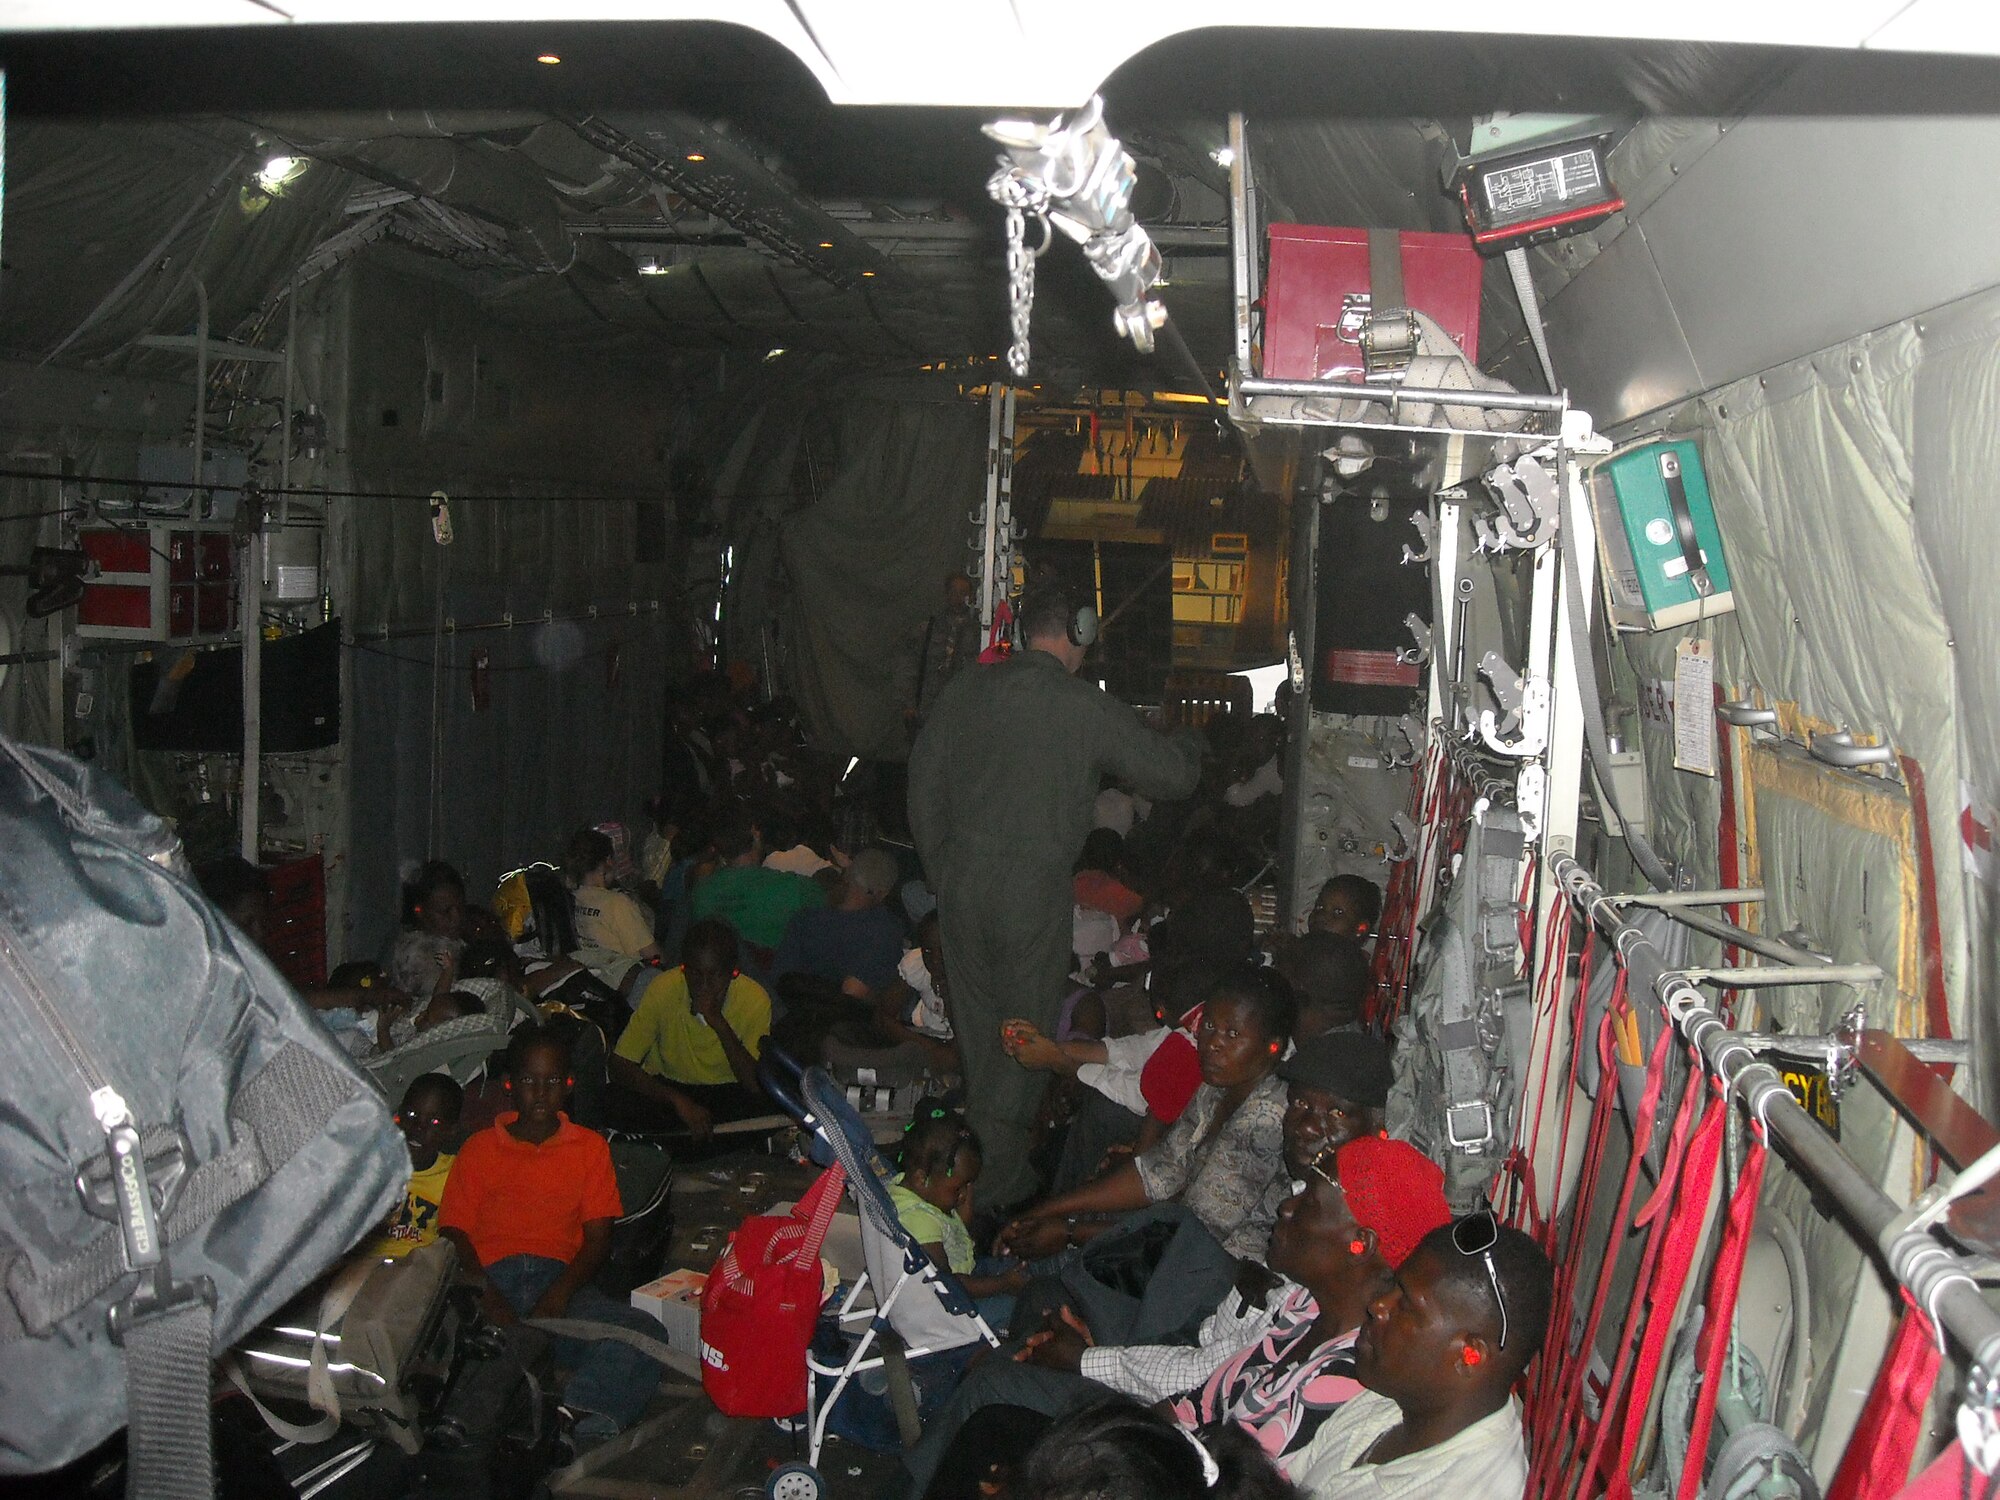 Two C-130 crews flew humanitarian aid items to Haiti and returned several American citizens to the United States, Jan. 19, 2010. One aircraft had over 60 people onboard. The people from Haiti were dropped off at Homestead Air Reserve Station in Florida before the crew returned to Berry Field, Nashville.